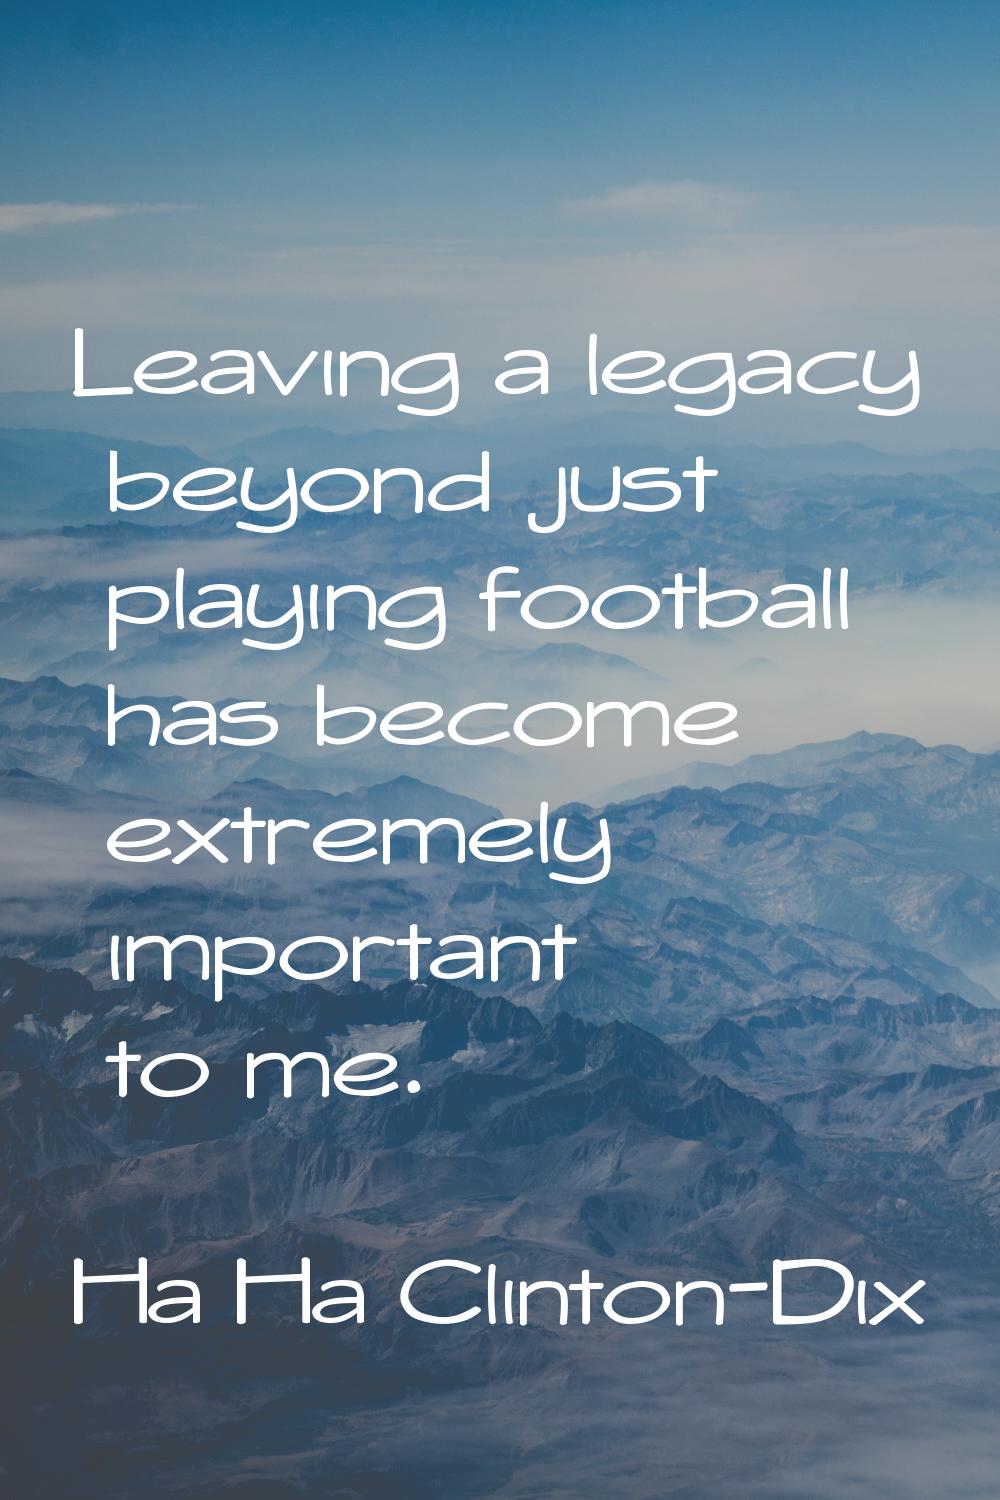 Leaving a legacy beyond just playing football has become extremely important to me.